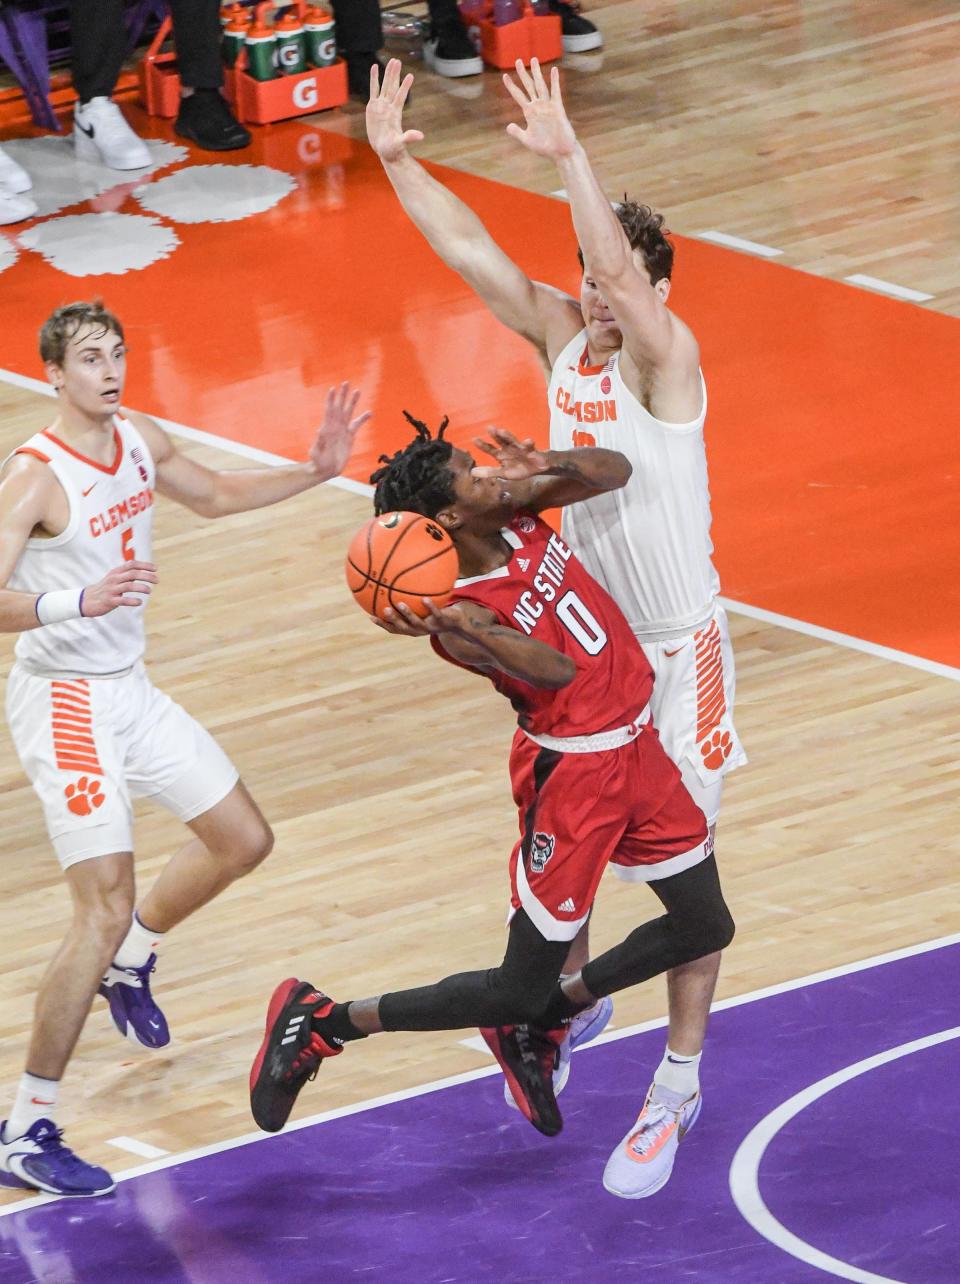 North Carolina State guard Terquavion Smith (0) shoots near Clemson sophomore forward Ben Middlebrooks (10) during the first half at Littlejohn Coliseum in Clemson, S.C. Friday, December 30, 2022.